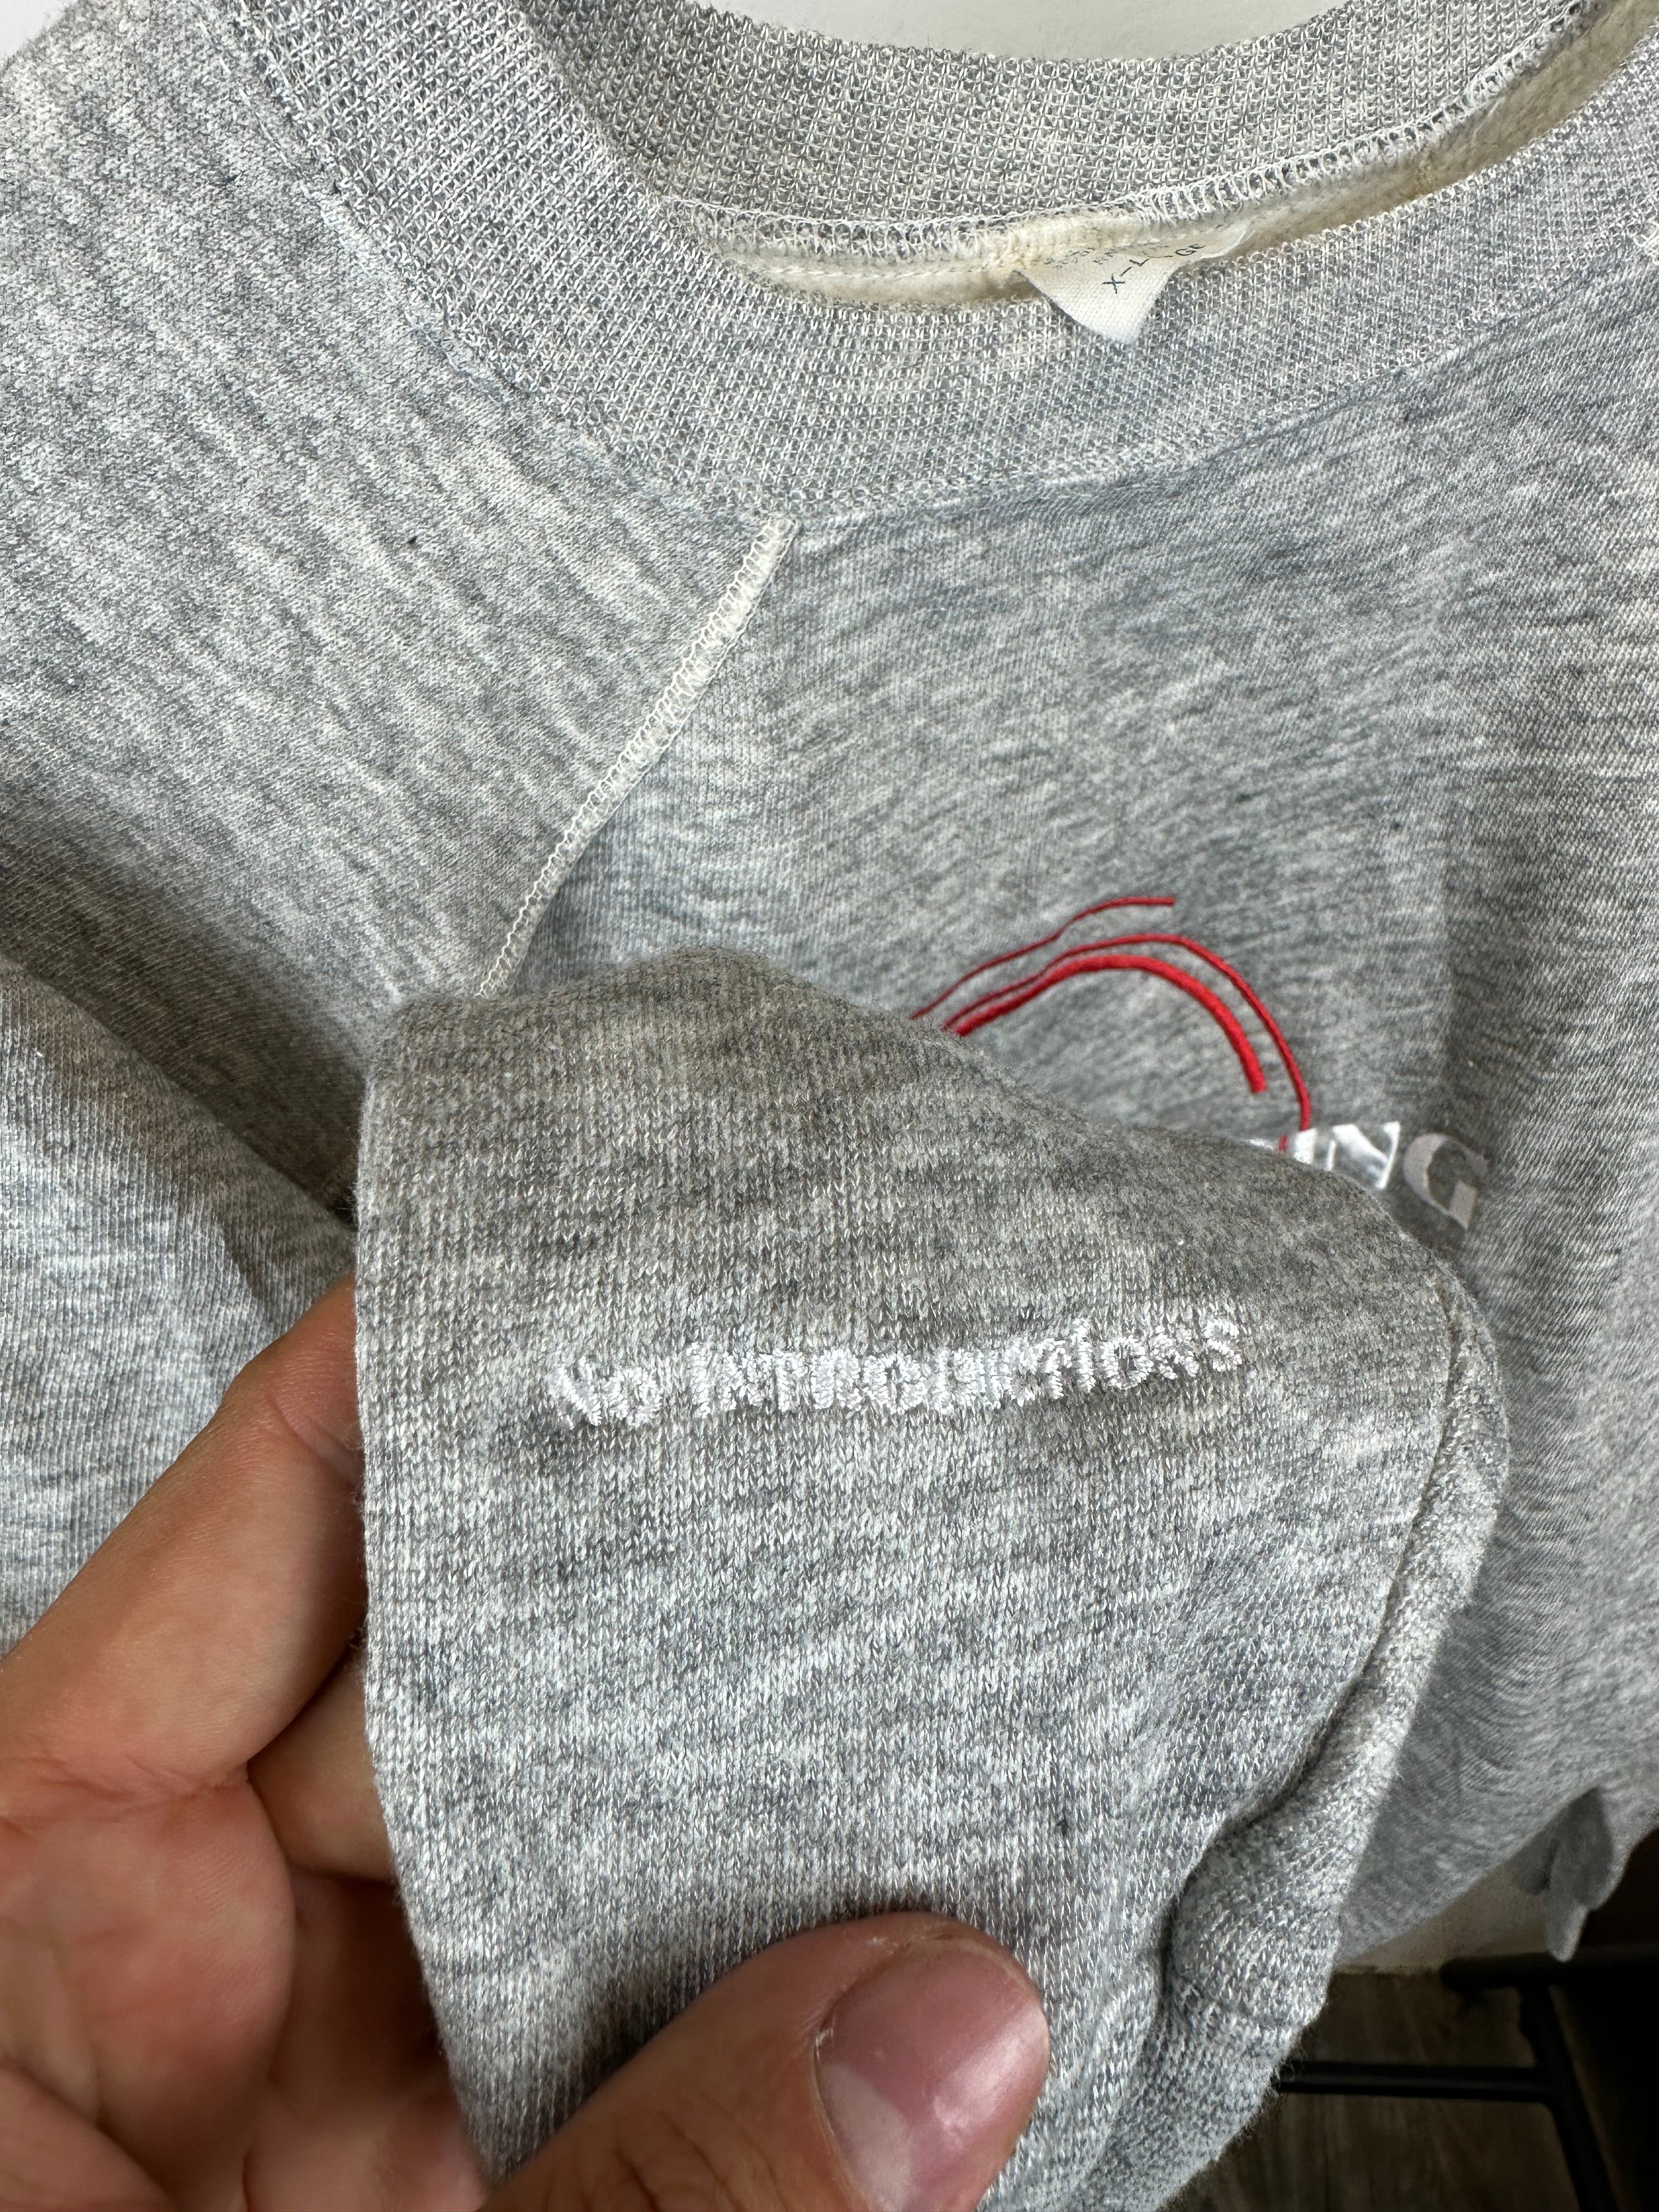 No Introductions - "Squaring of the Circle" crewneck - size M/L